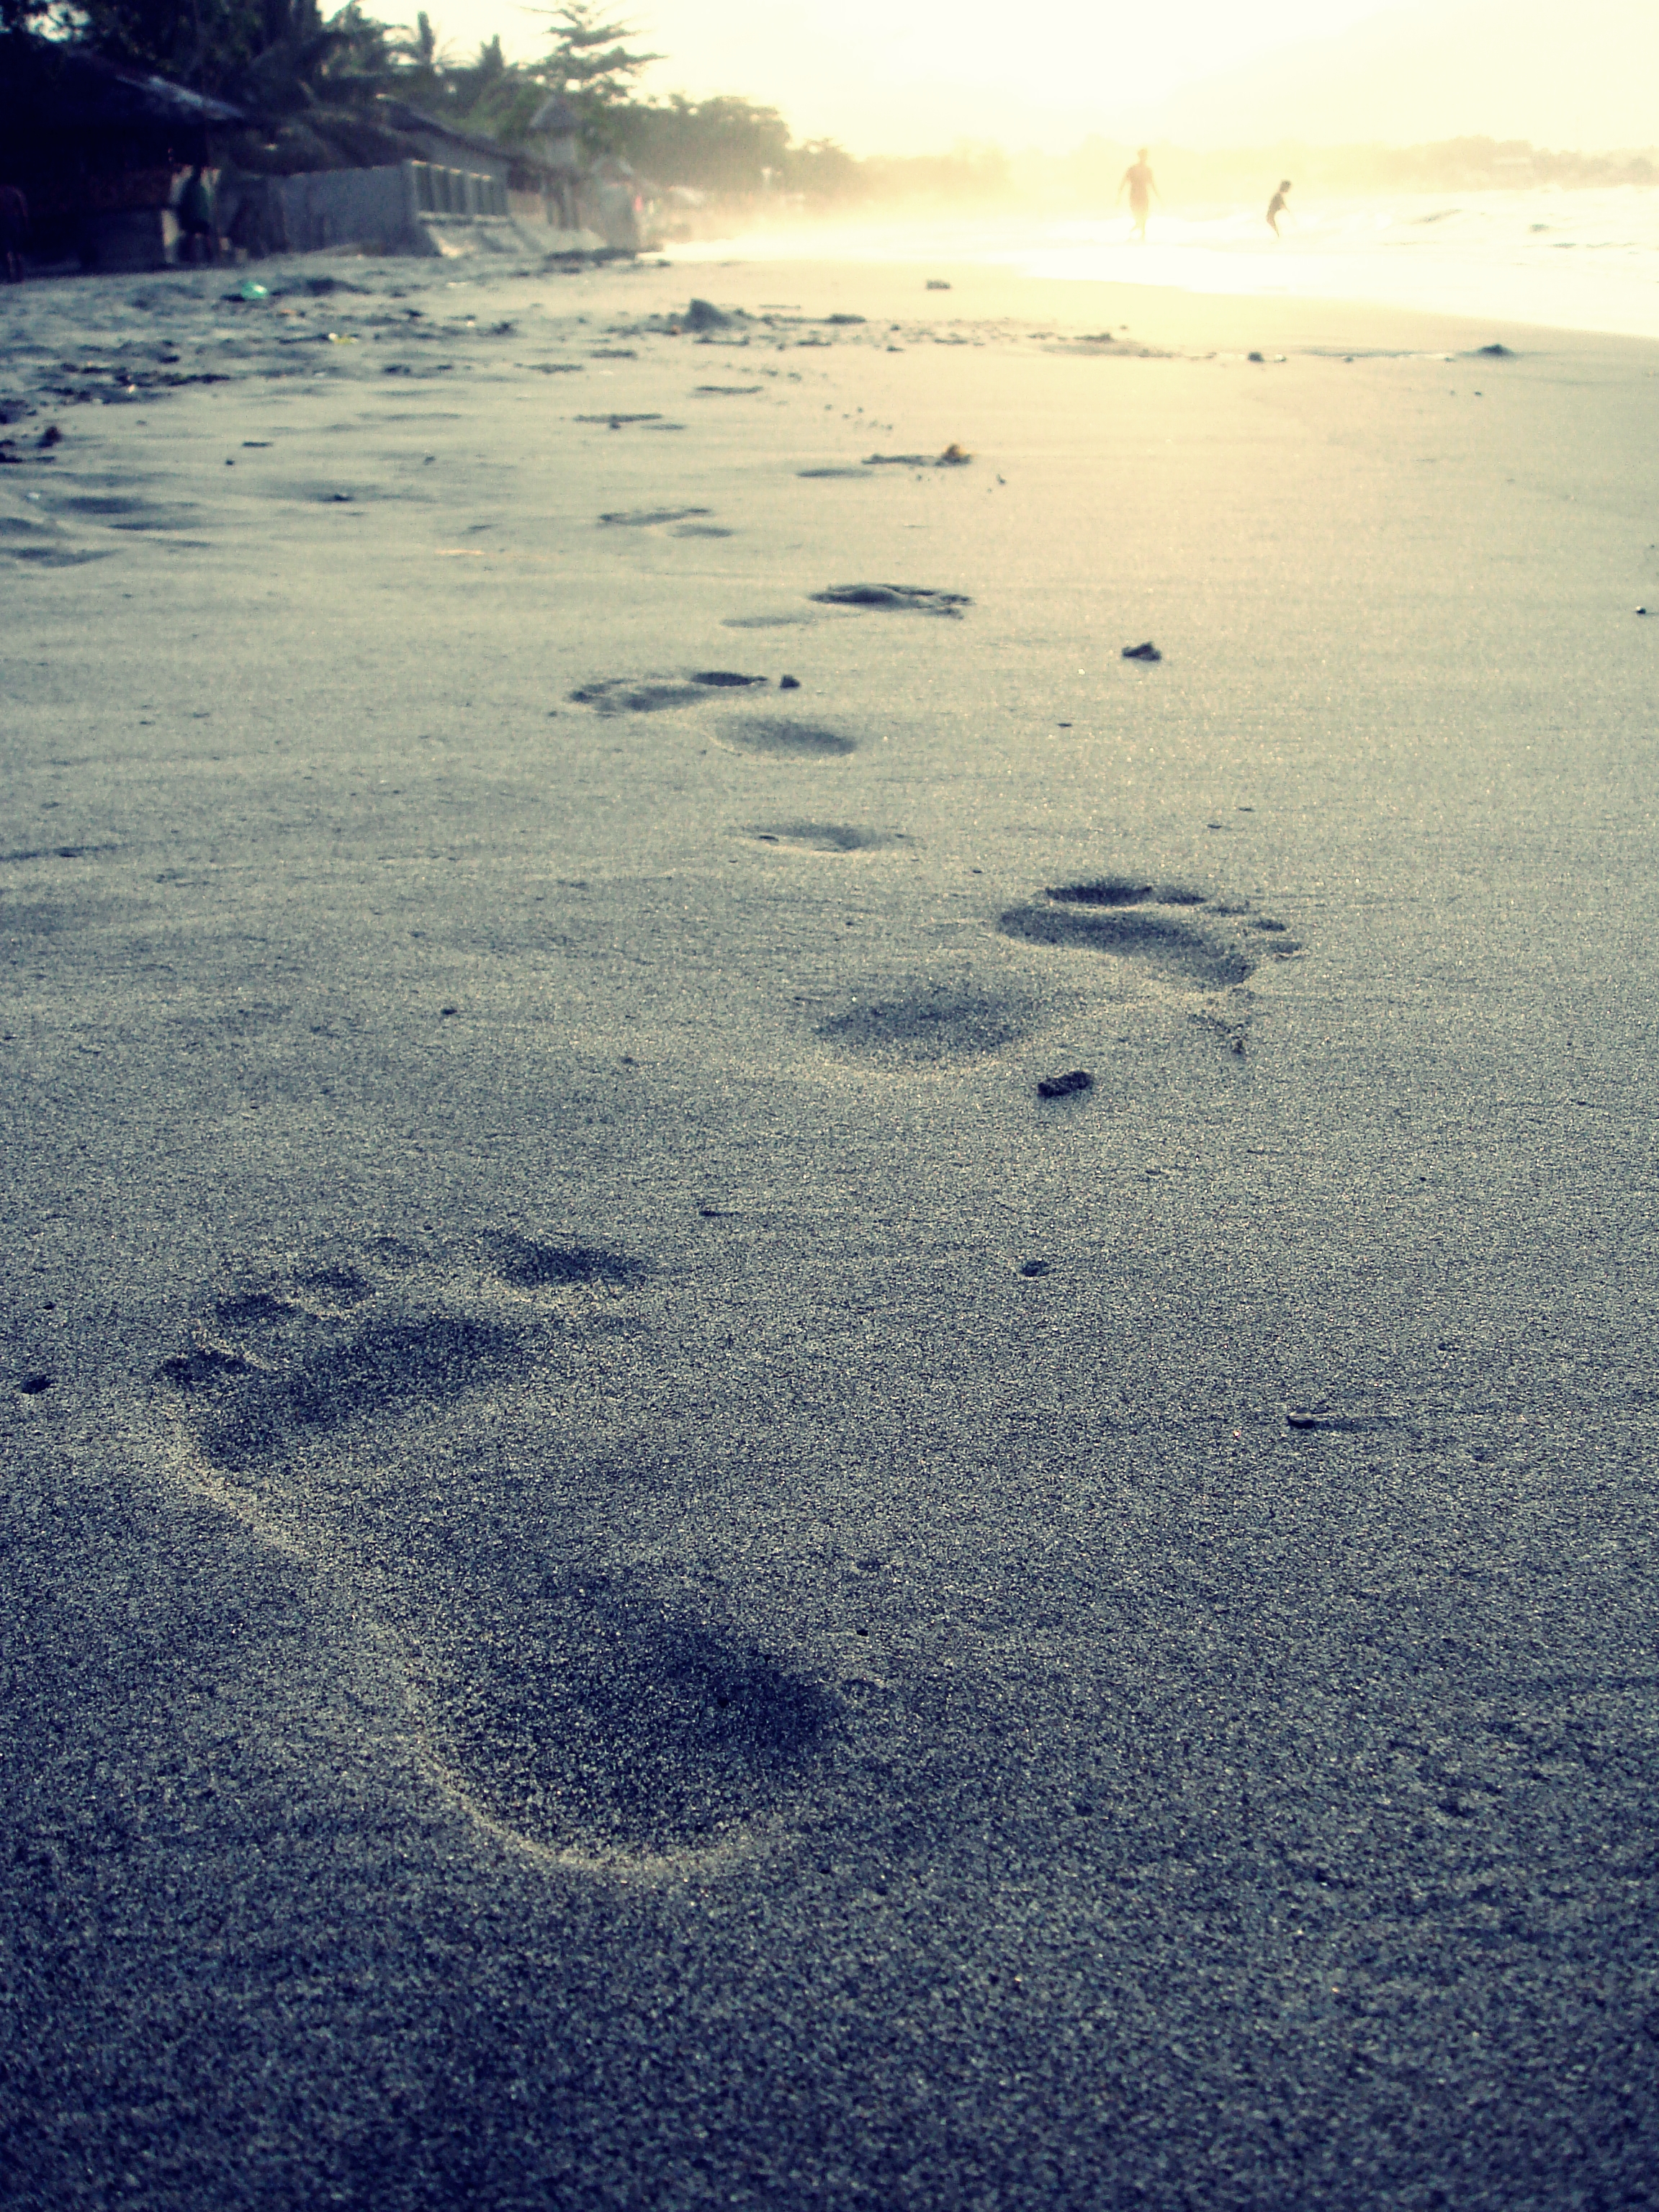 footprints in the sand by camsy-craze on DeviantArt